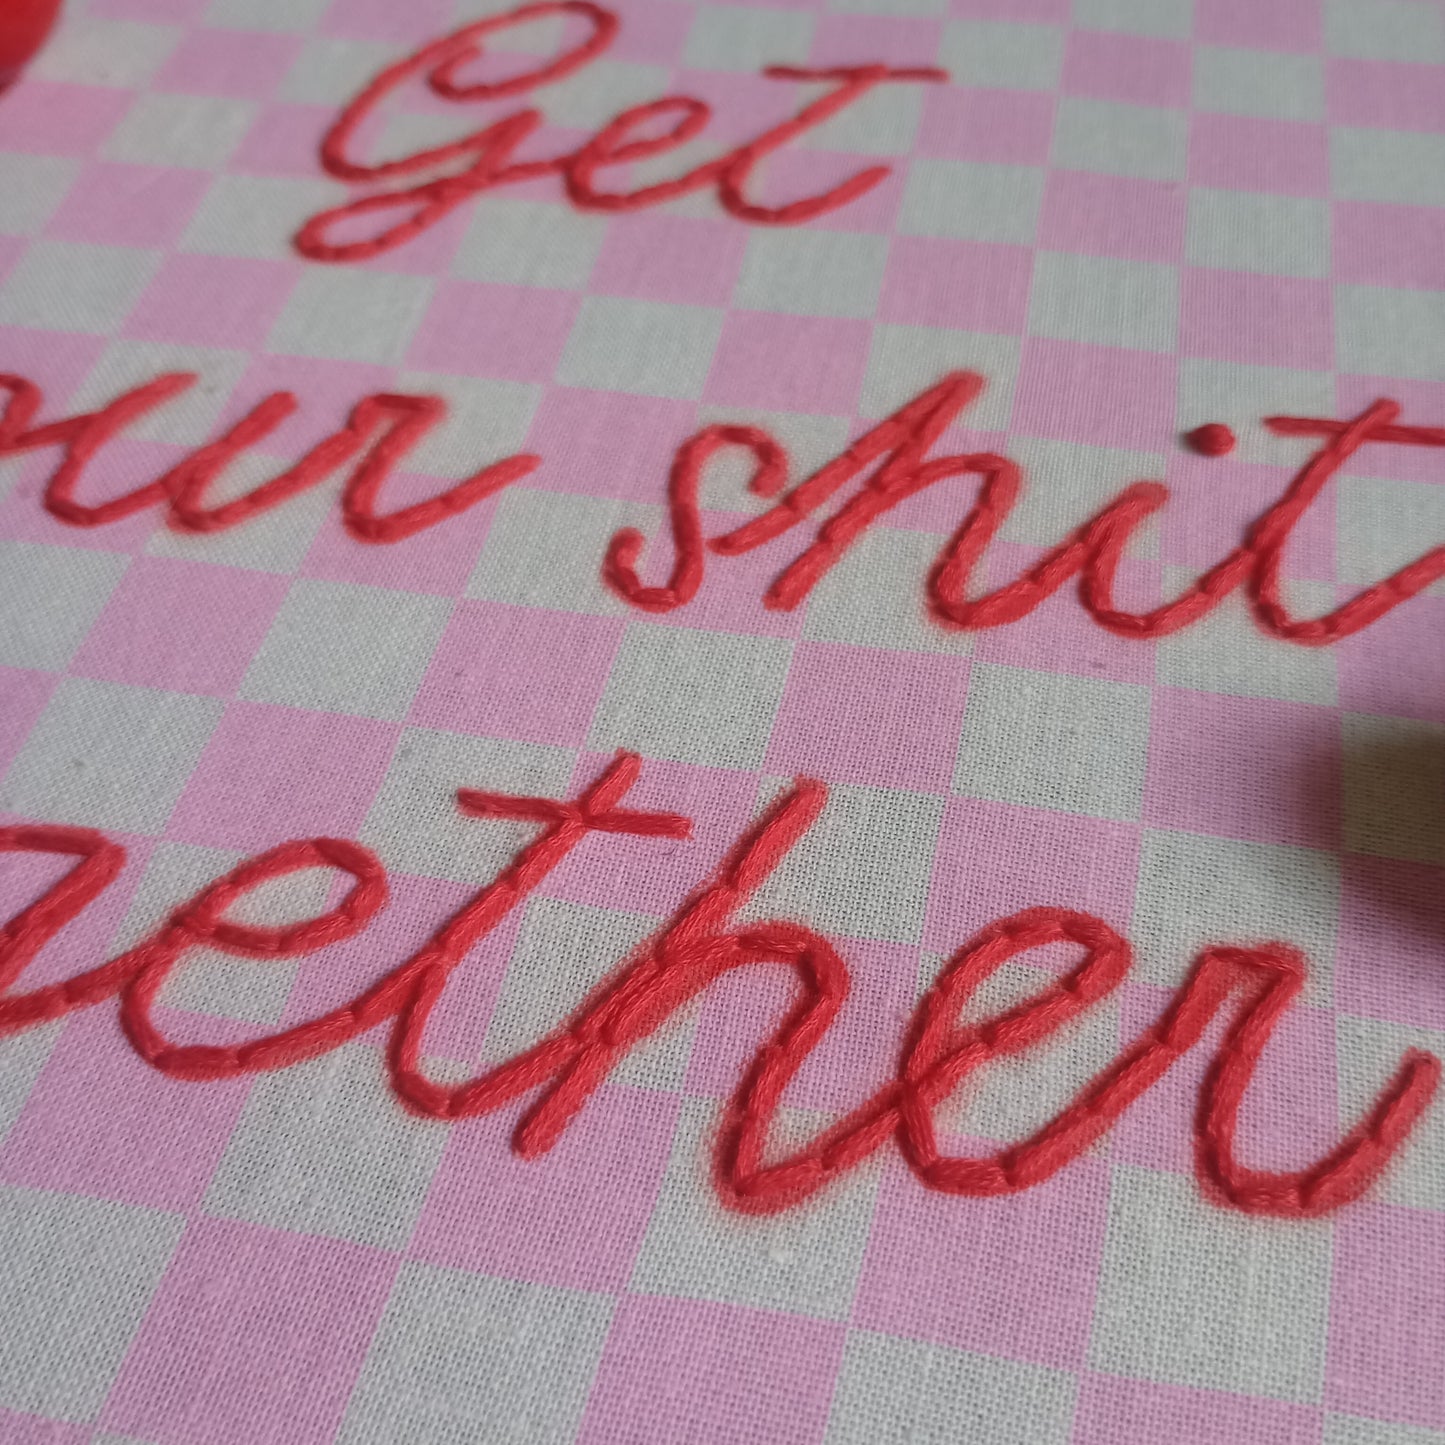 Get your shit together - Hand Embroidery Hoop for Display 10 inch